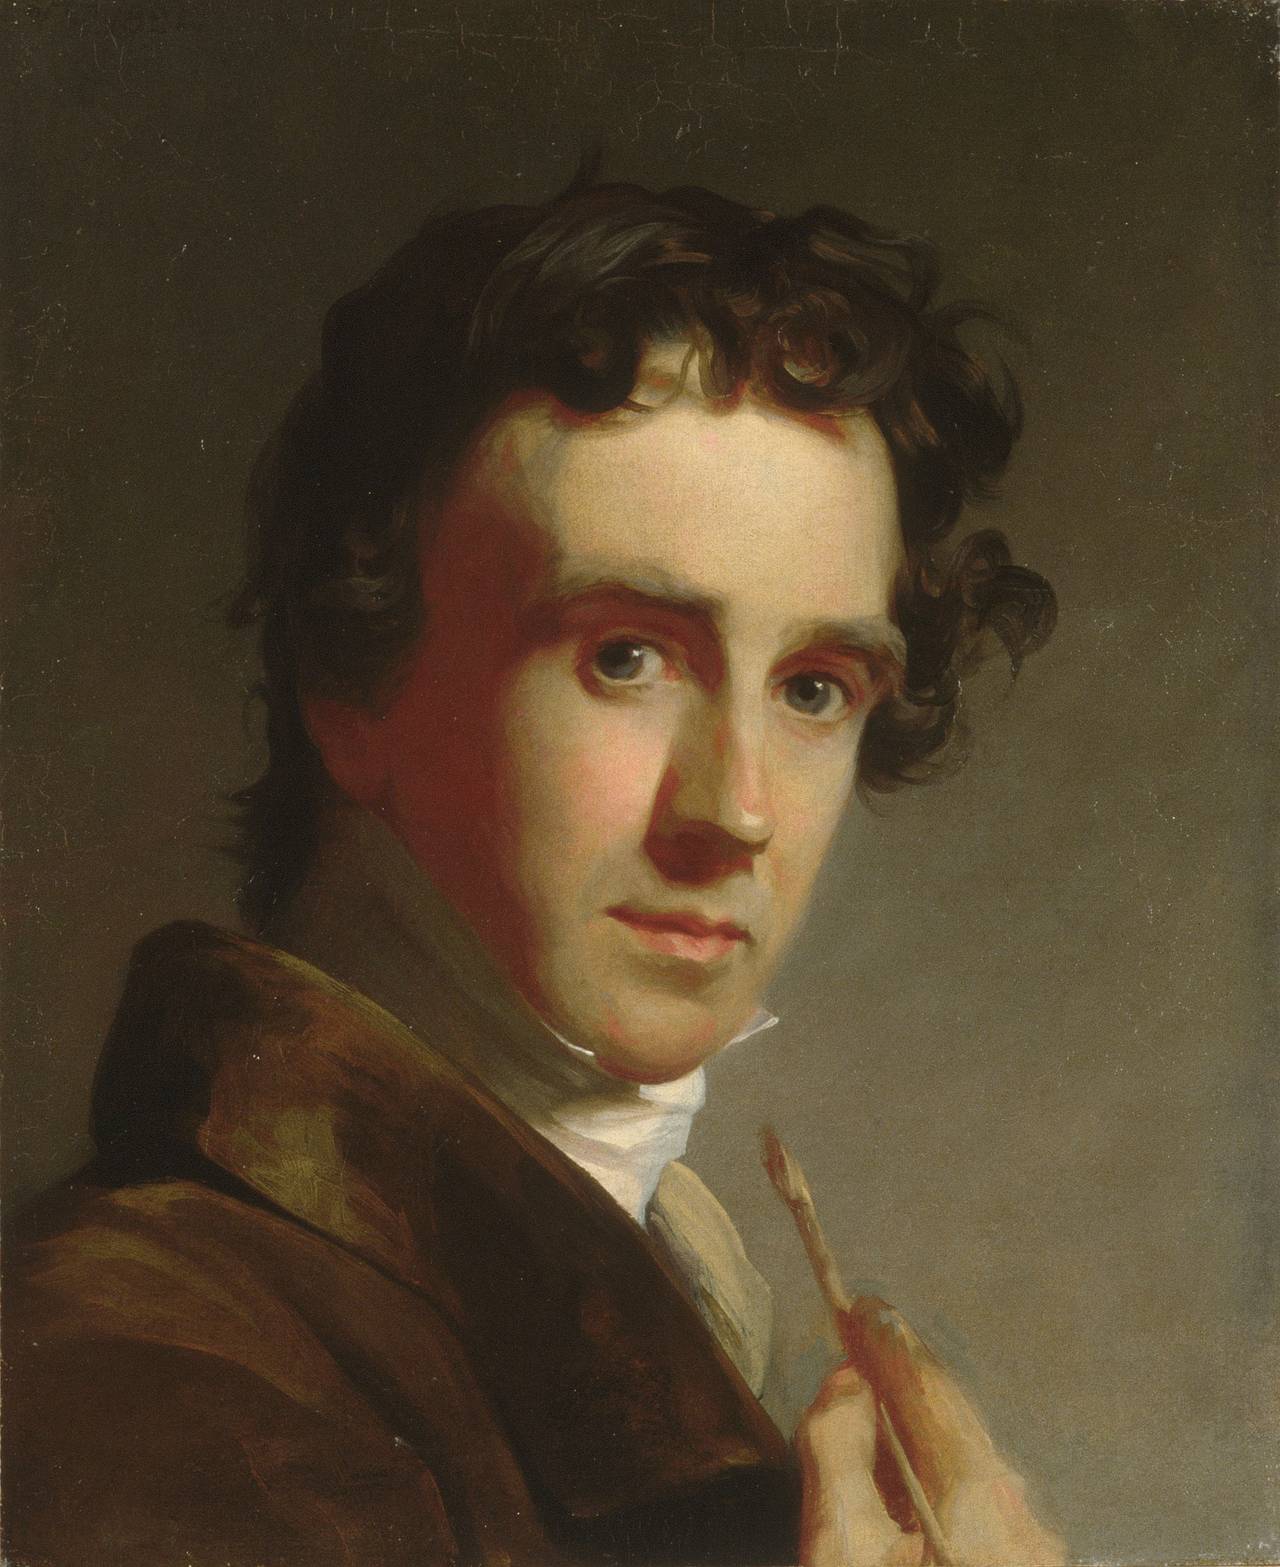 Portrait of the Artist by Thomas Sully